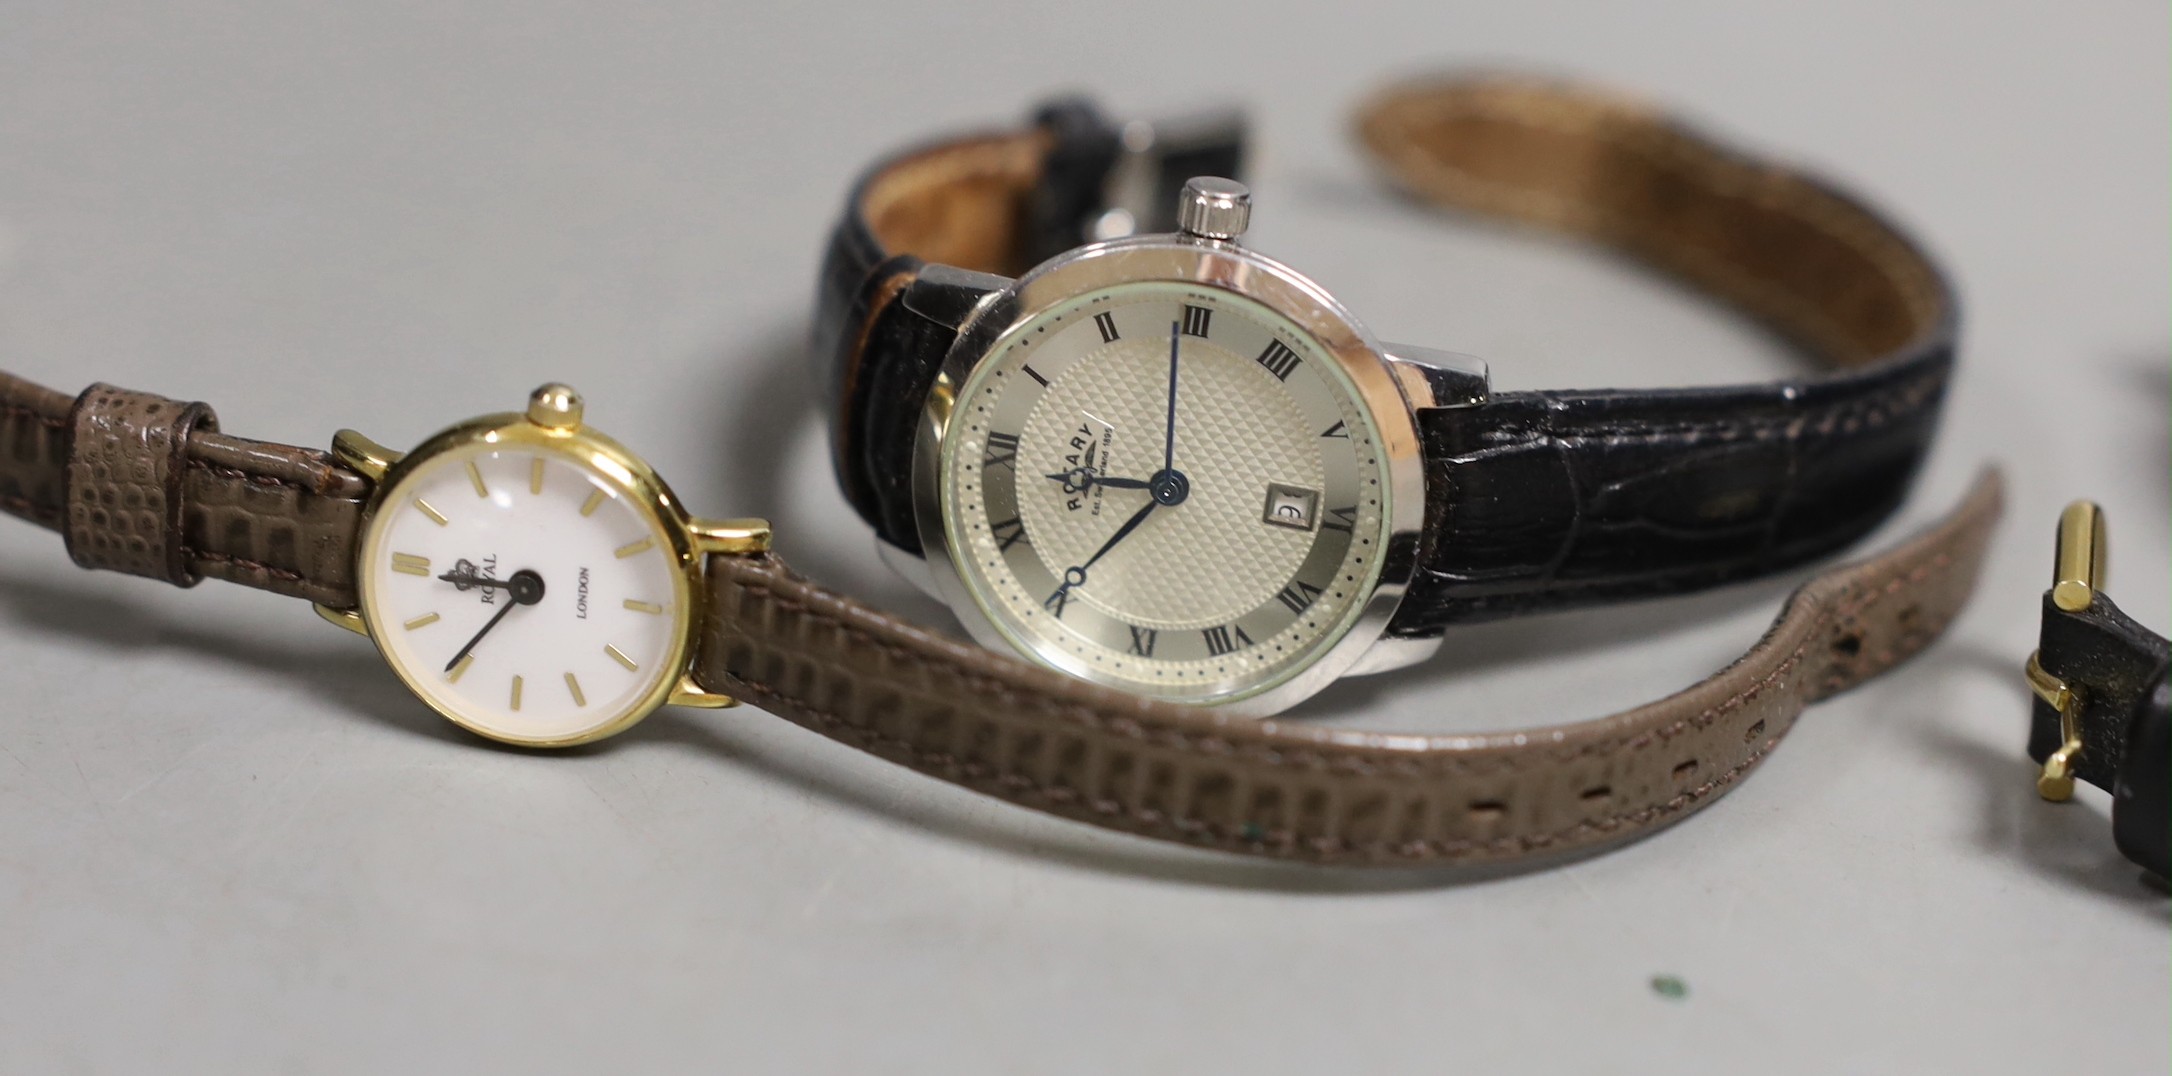 Six various lady's wrist watches, with quartz and other movements, including Sekonda and Rotary and a pair of simulated pearl earrings.